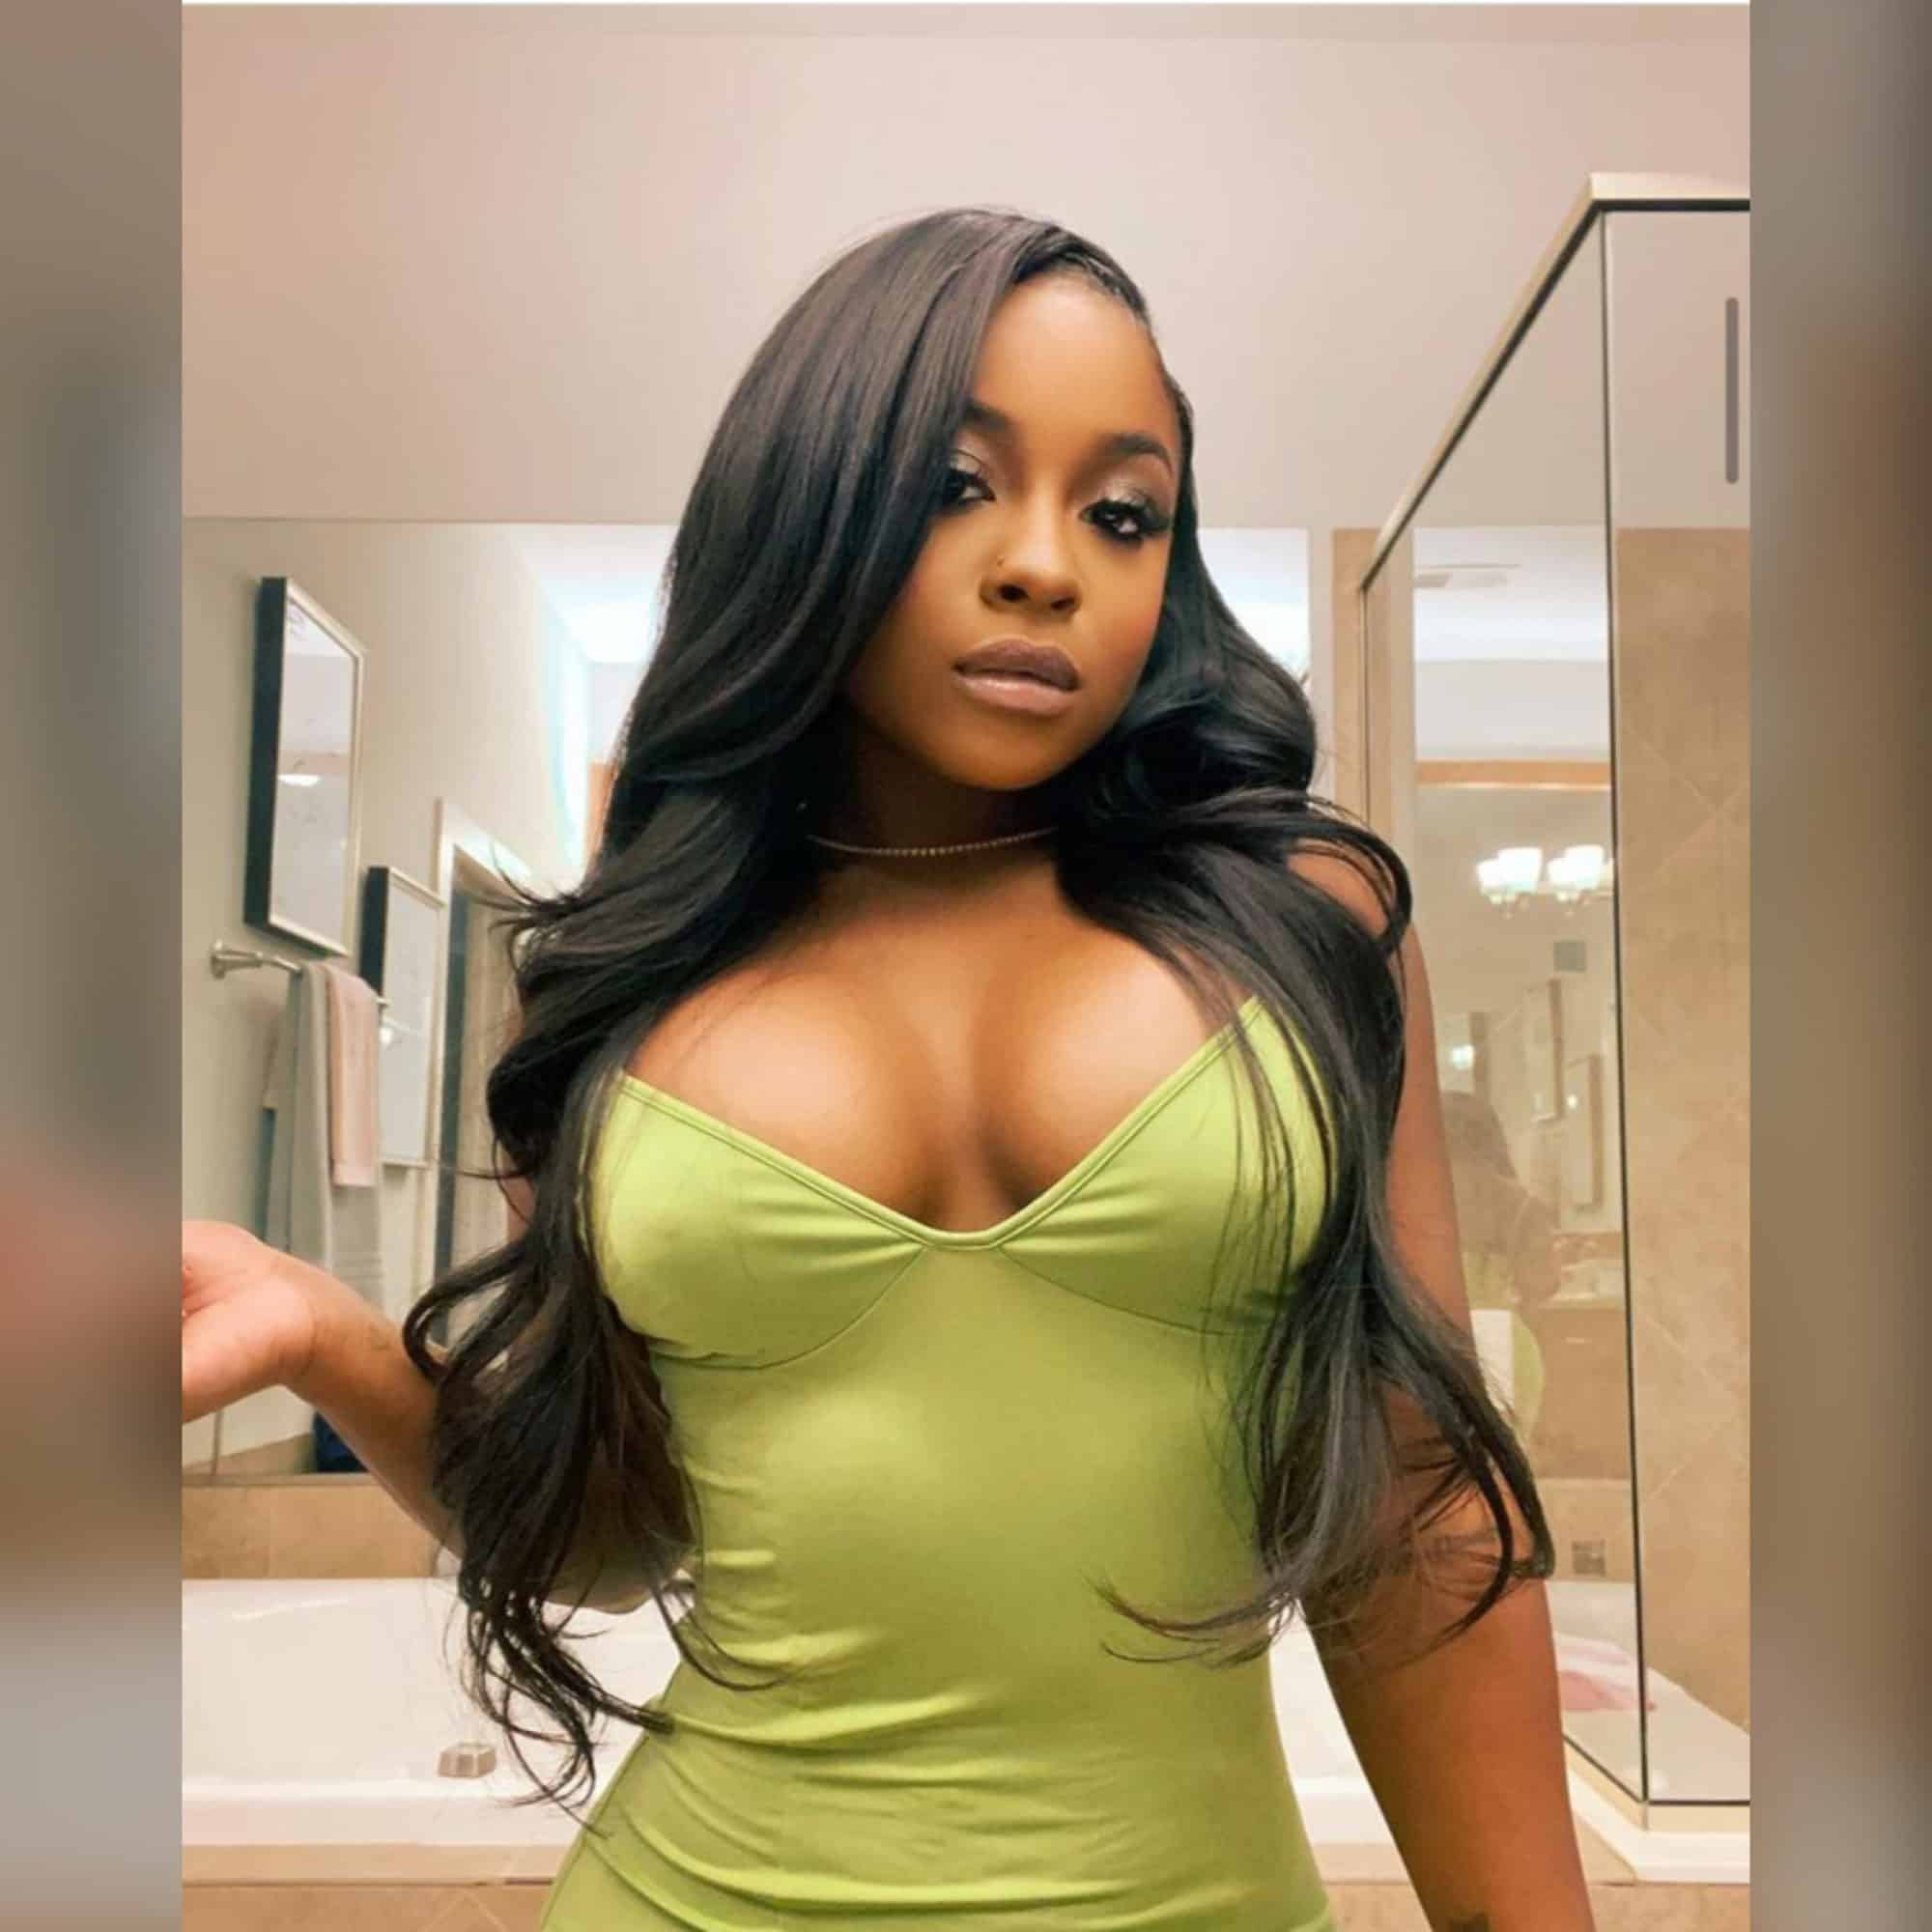 Reginae Carter Talks About Her Breast Implants-"I Loved Myself Before The Boobs, And I Love Myself After"